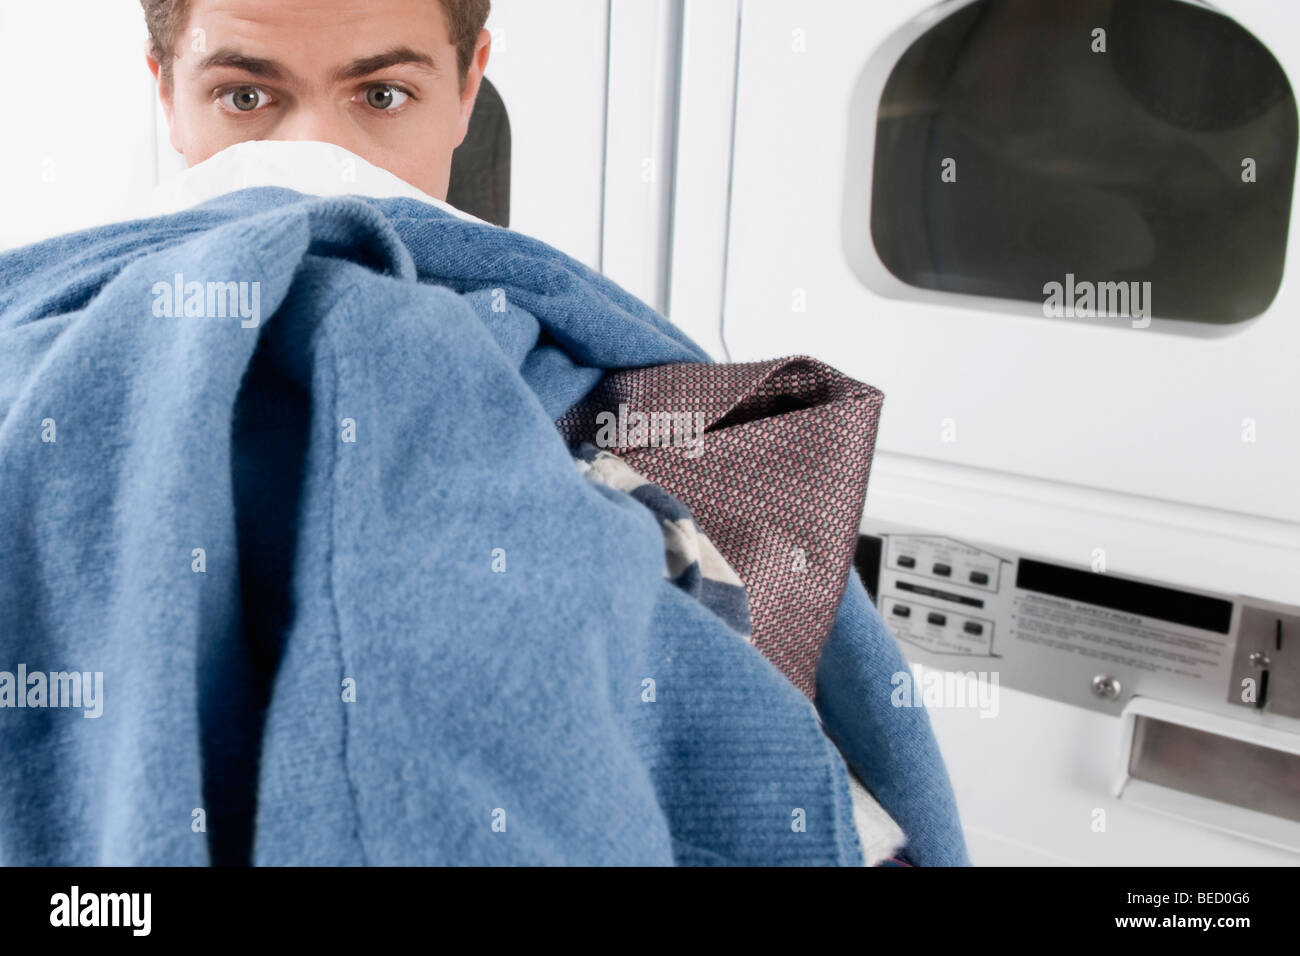 Man carrying clothes in a laundromat Stock Photo